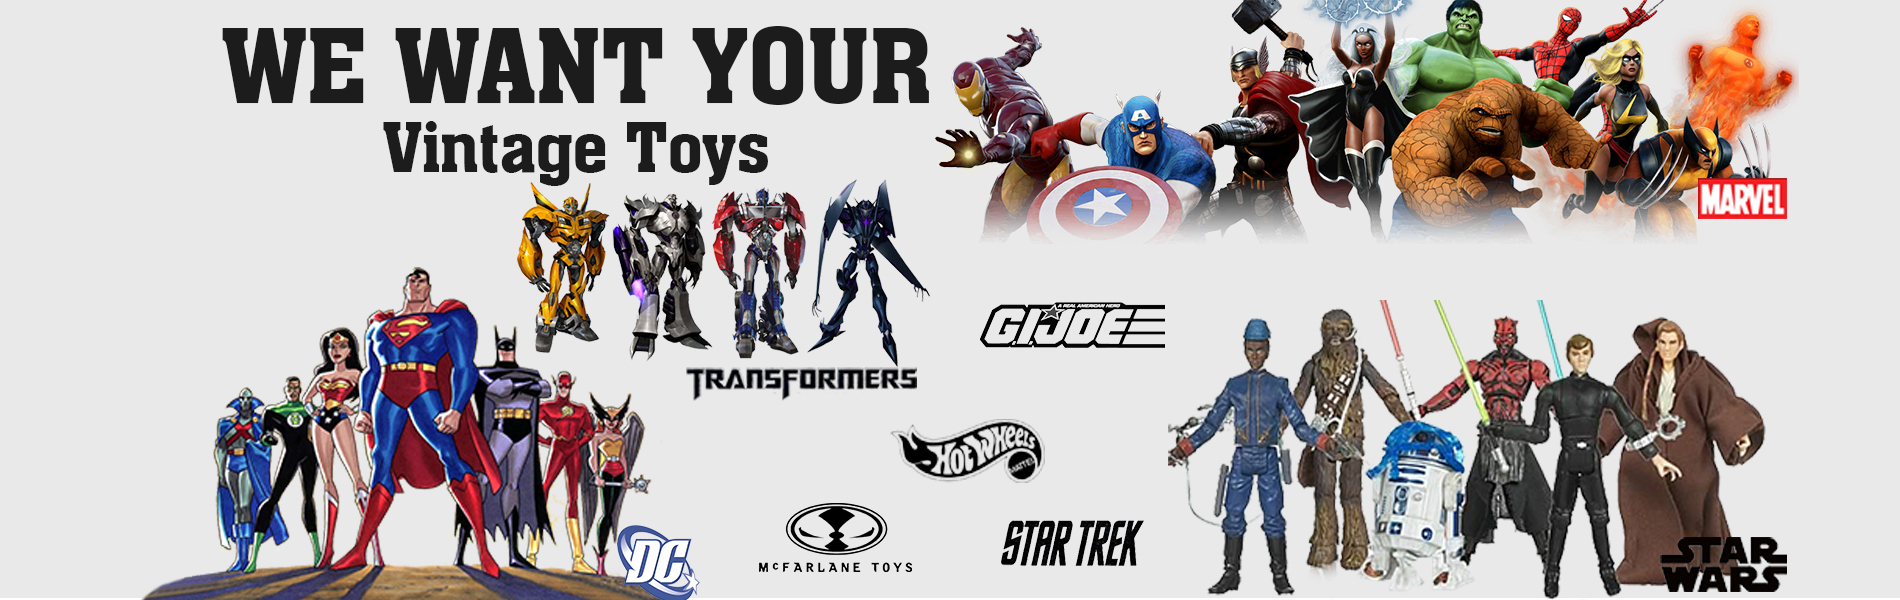 We Want Your Vintage Toys